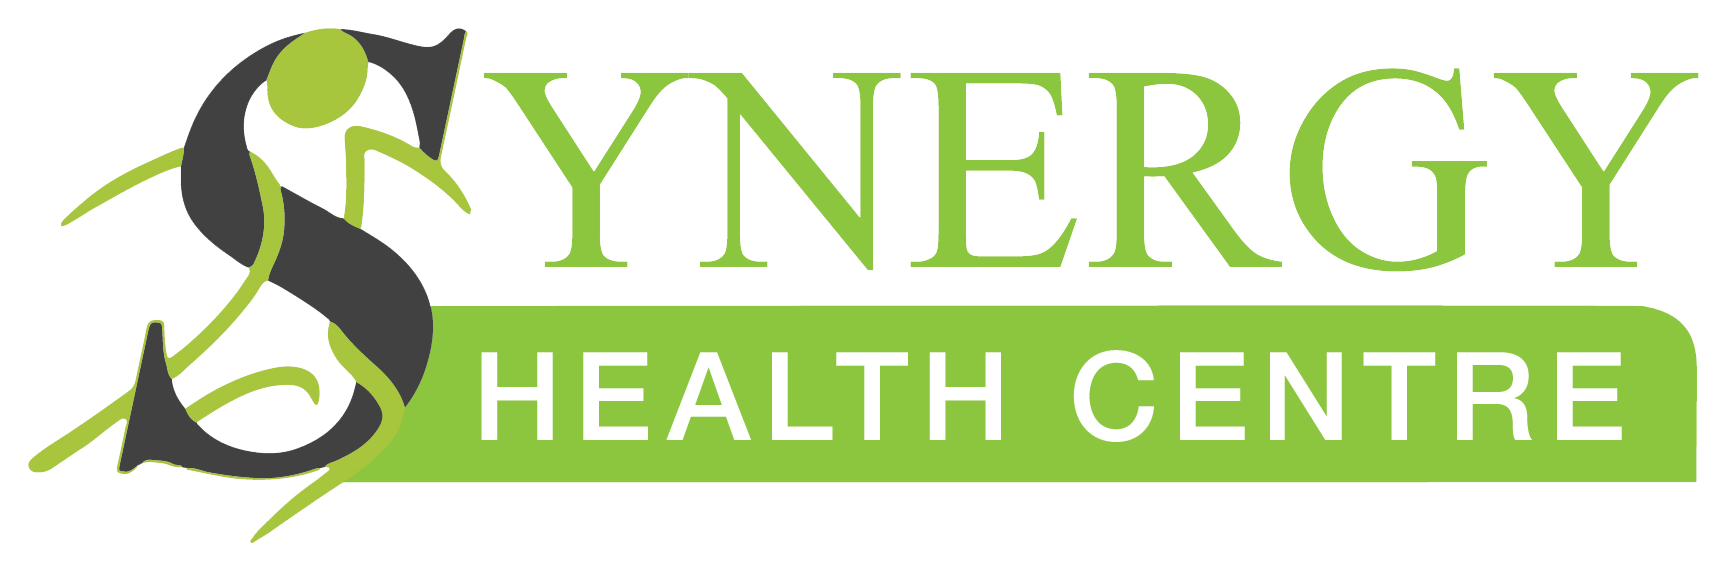 Synergy Sports and Medical